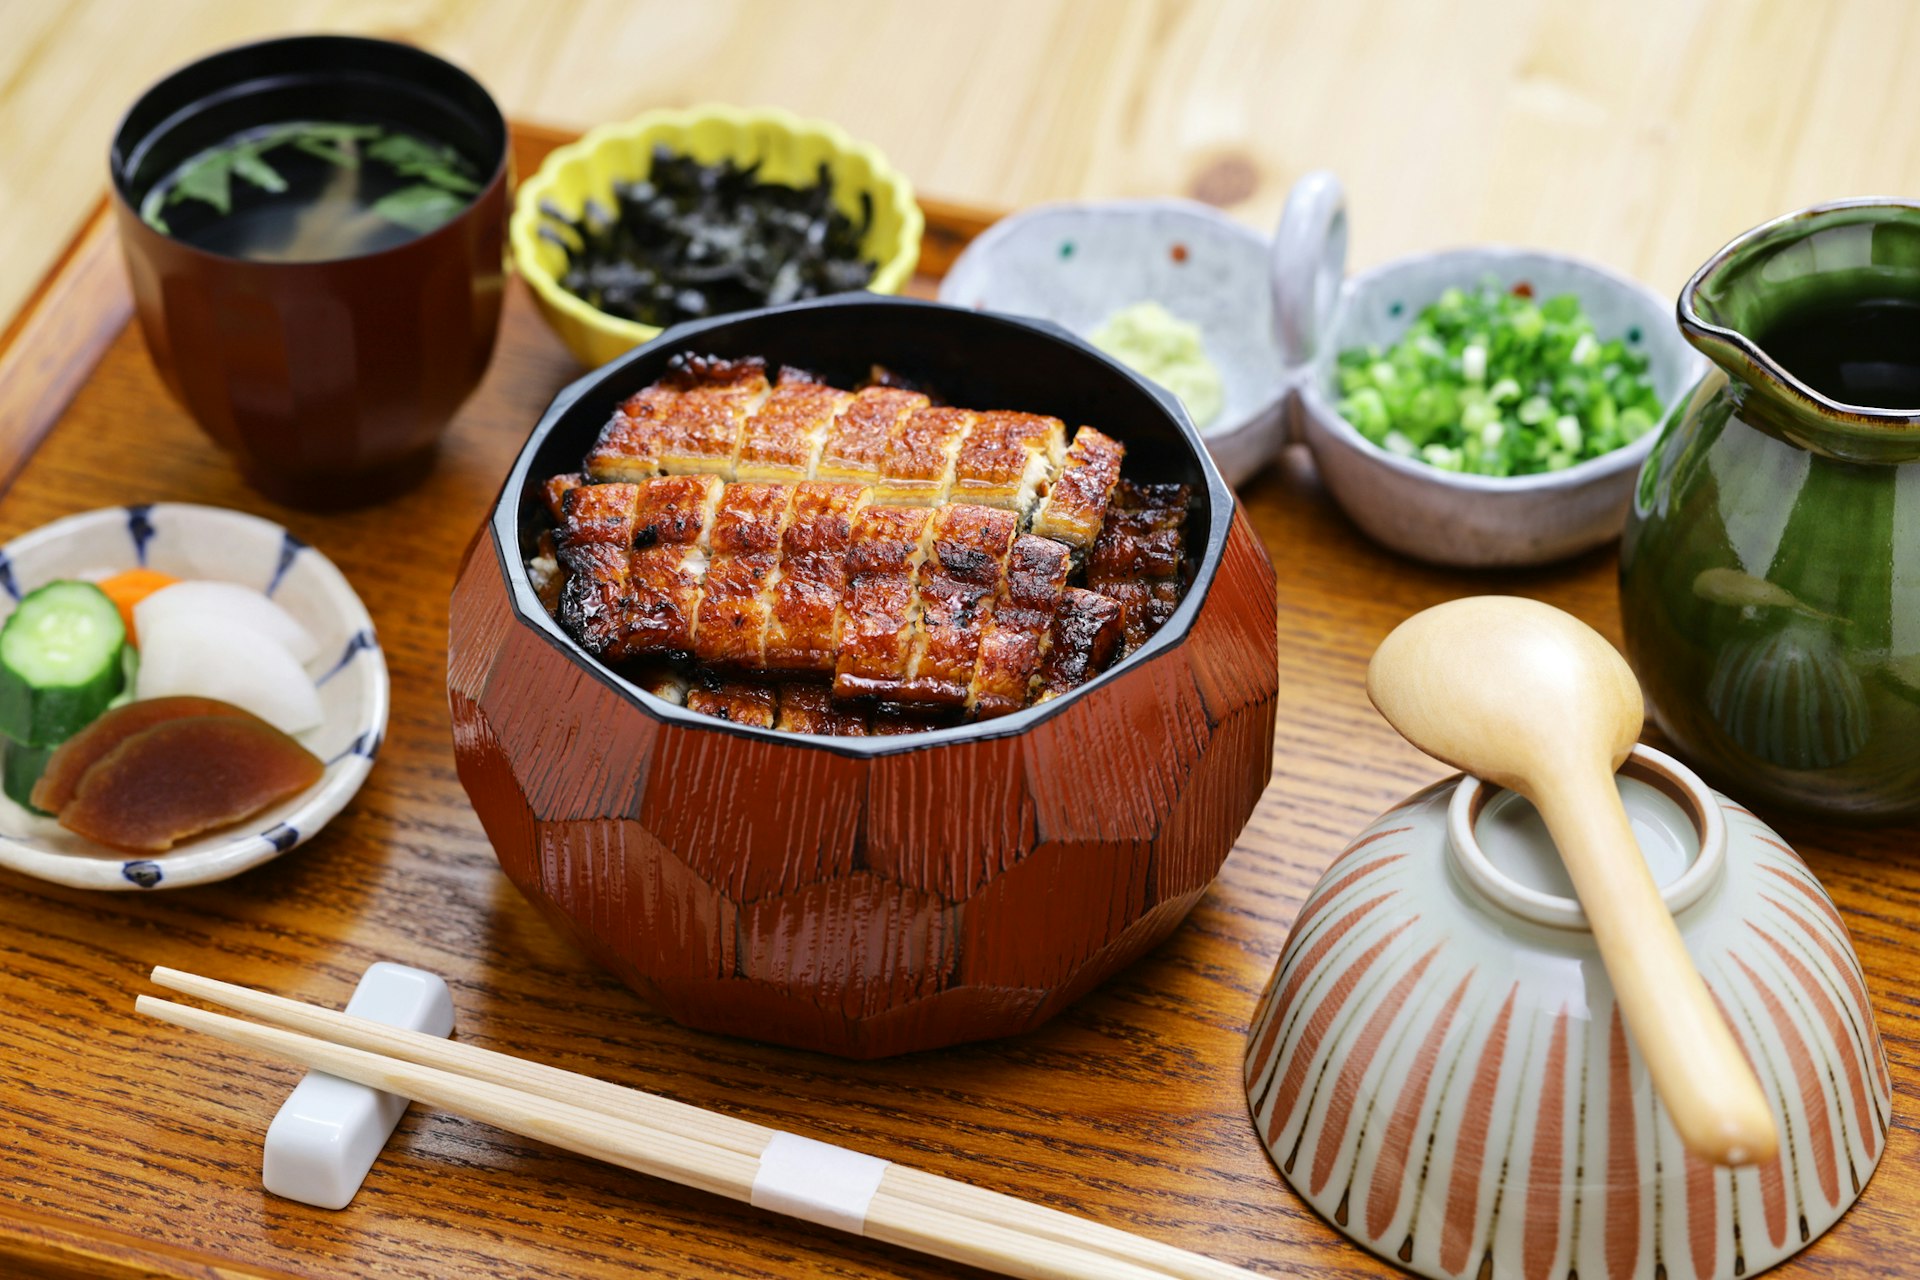 A bowl of hitsumabushi is a Japanese Nagoya rice dish decorated with grilled Unagi eel at the top. The eel is served in smaller pieces that allows it to be enjoyed with simply plain rice, or accompanying condiments and an original soup stock or hot tea.